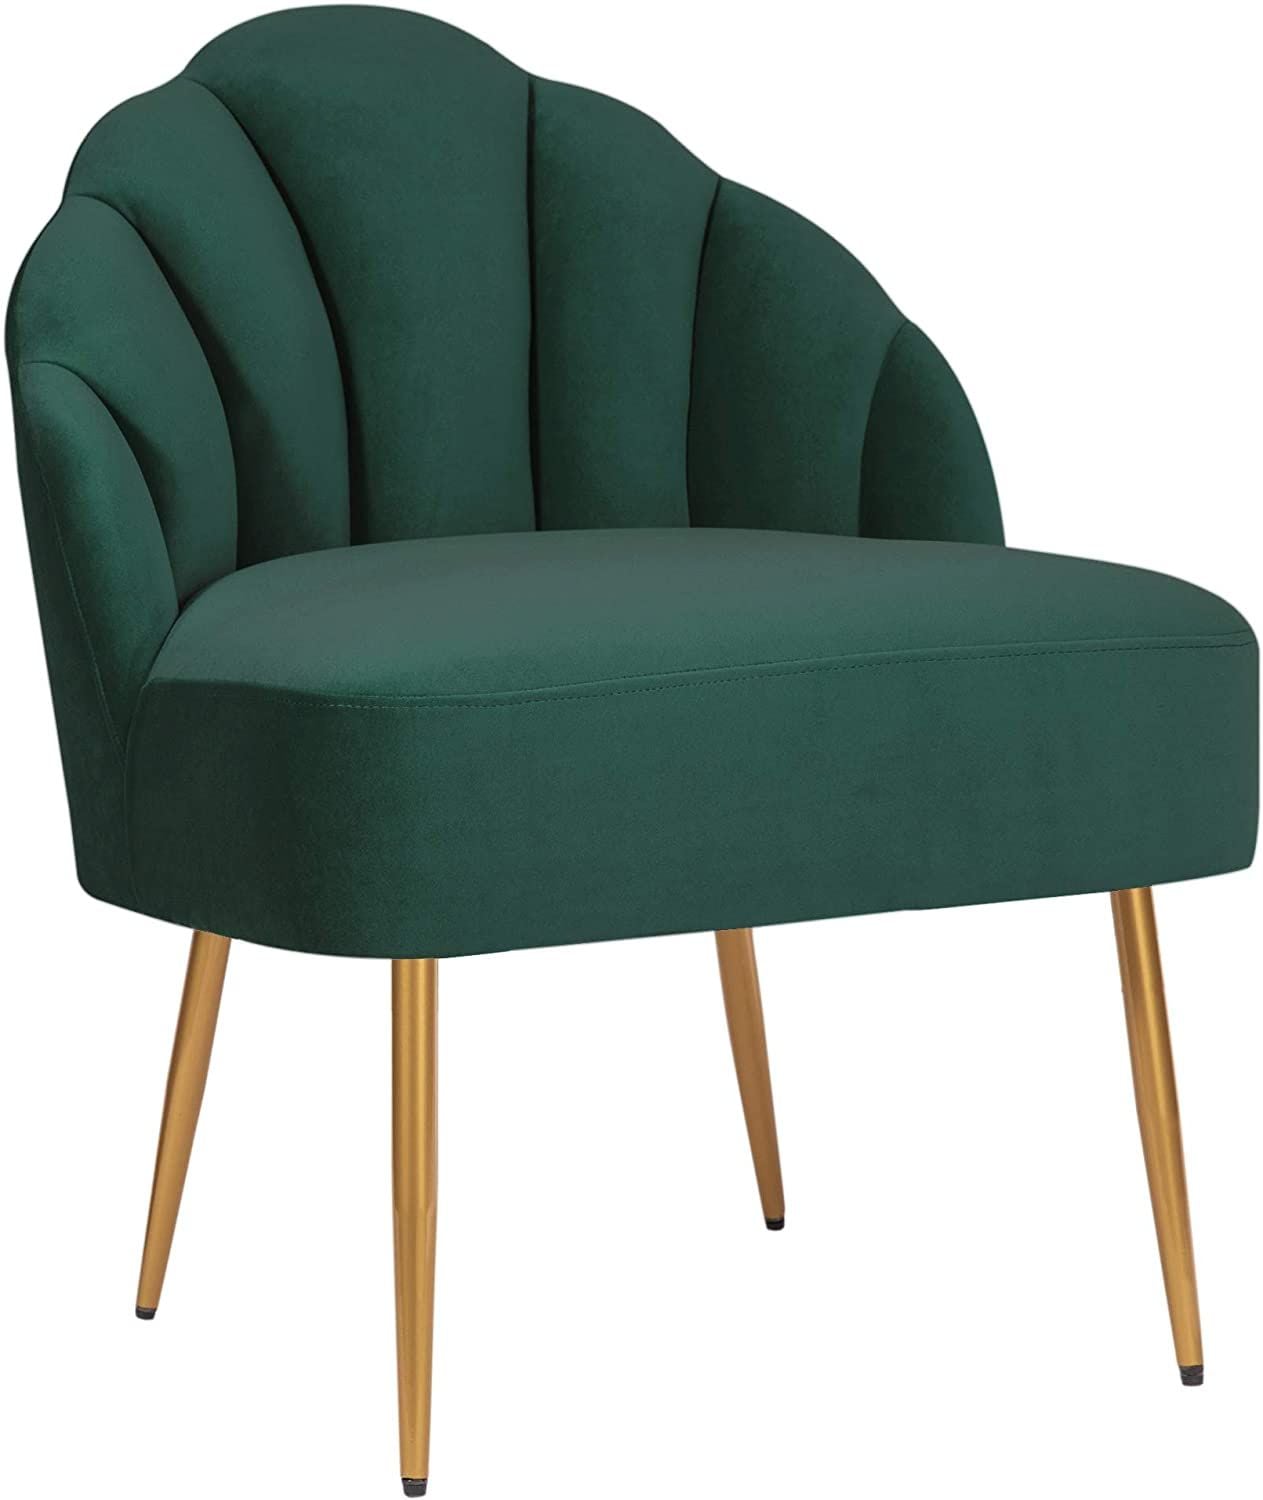 Sheena Glam Tufted Velvet Shell Chair, as featured in Amazon's 2021 Big Winter Sale.